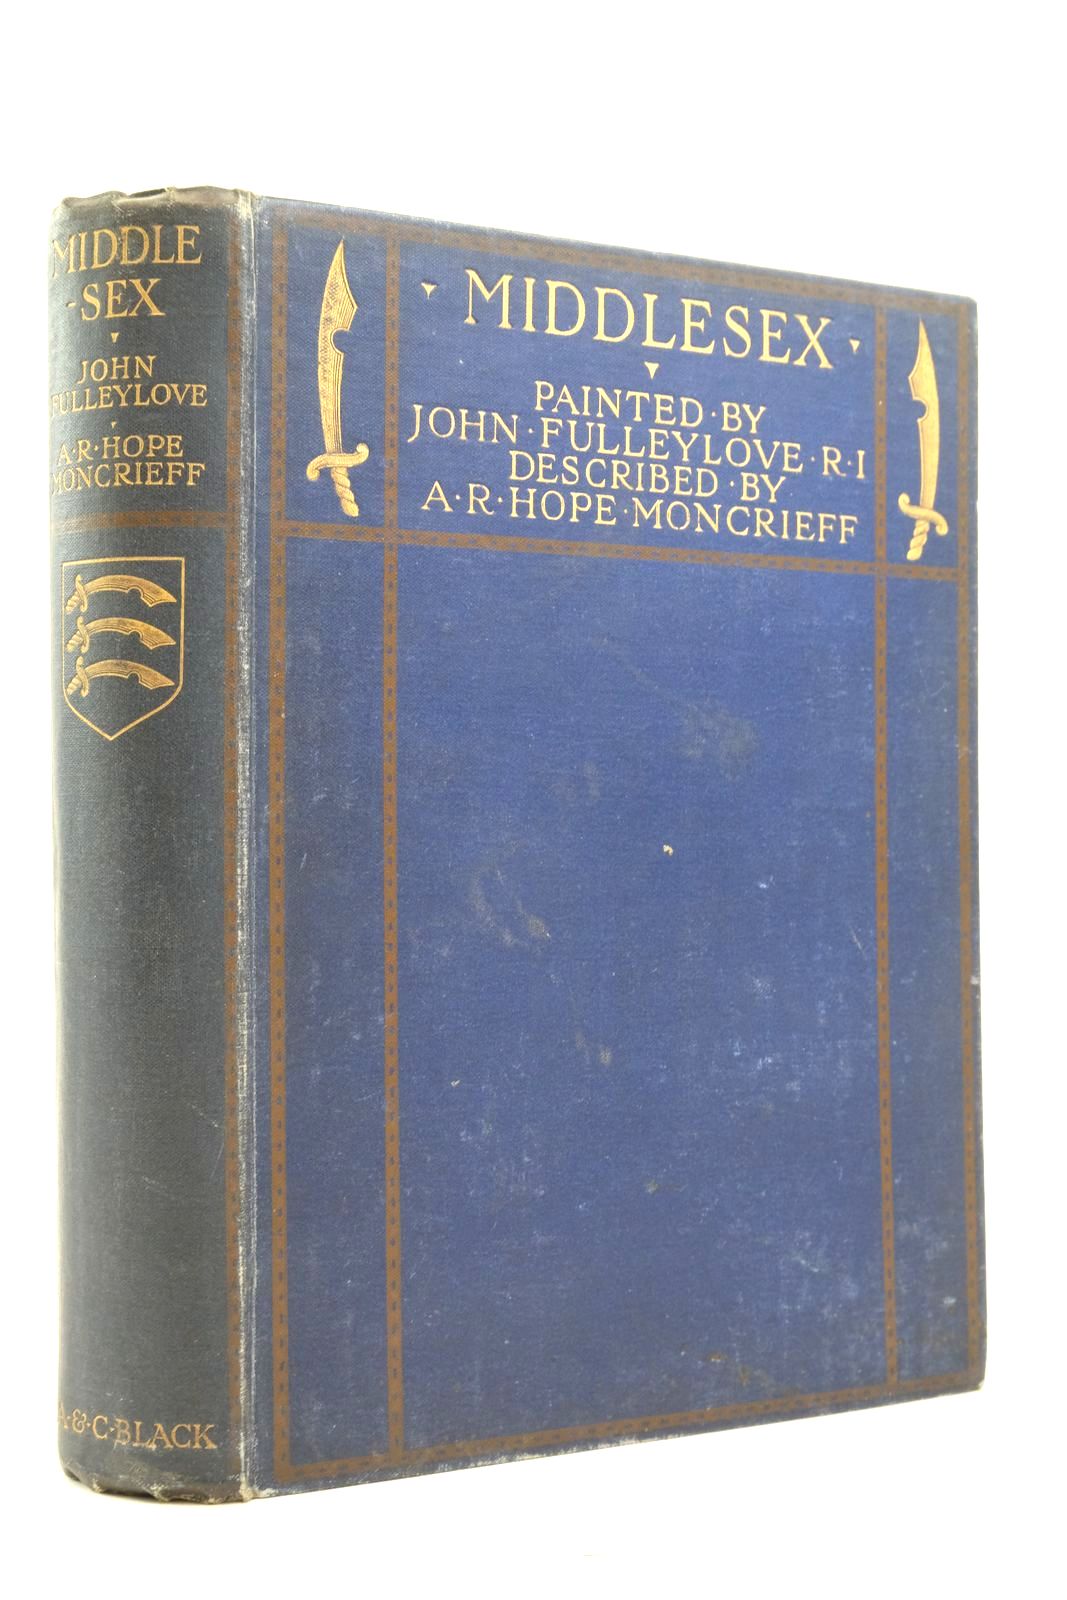 Photo of MIDDLESEX written by Moncrieff, A.R. Hope illustrated by Fulleylove, John published by Adam & Charles Black (STOCK CODE: 2137118)  for sale by Stella & Rose's Books